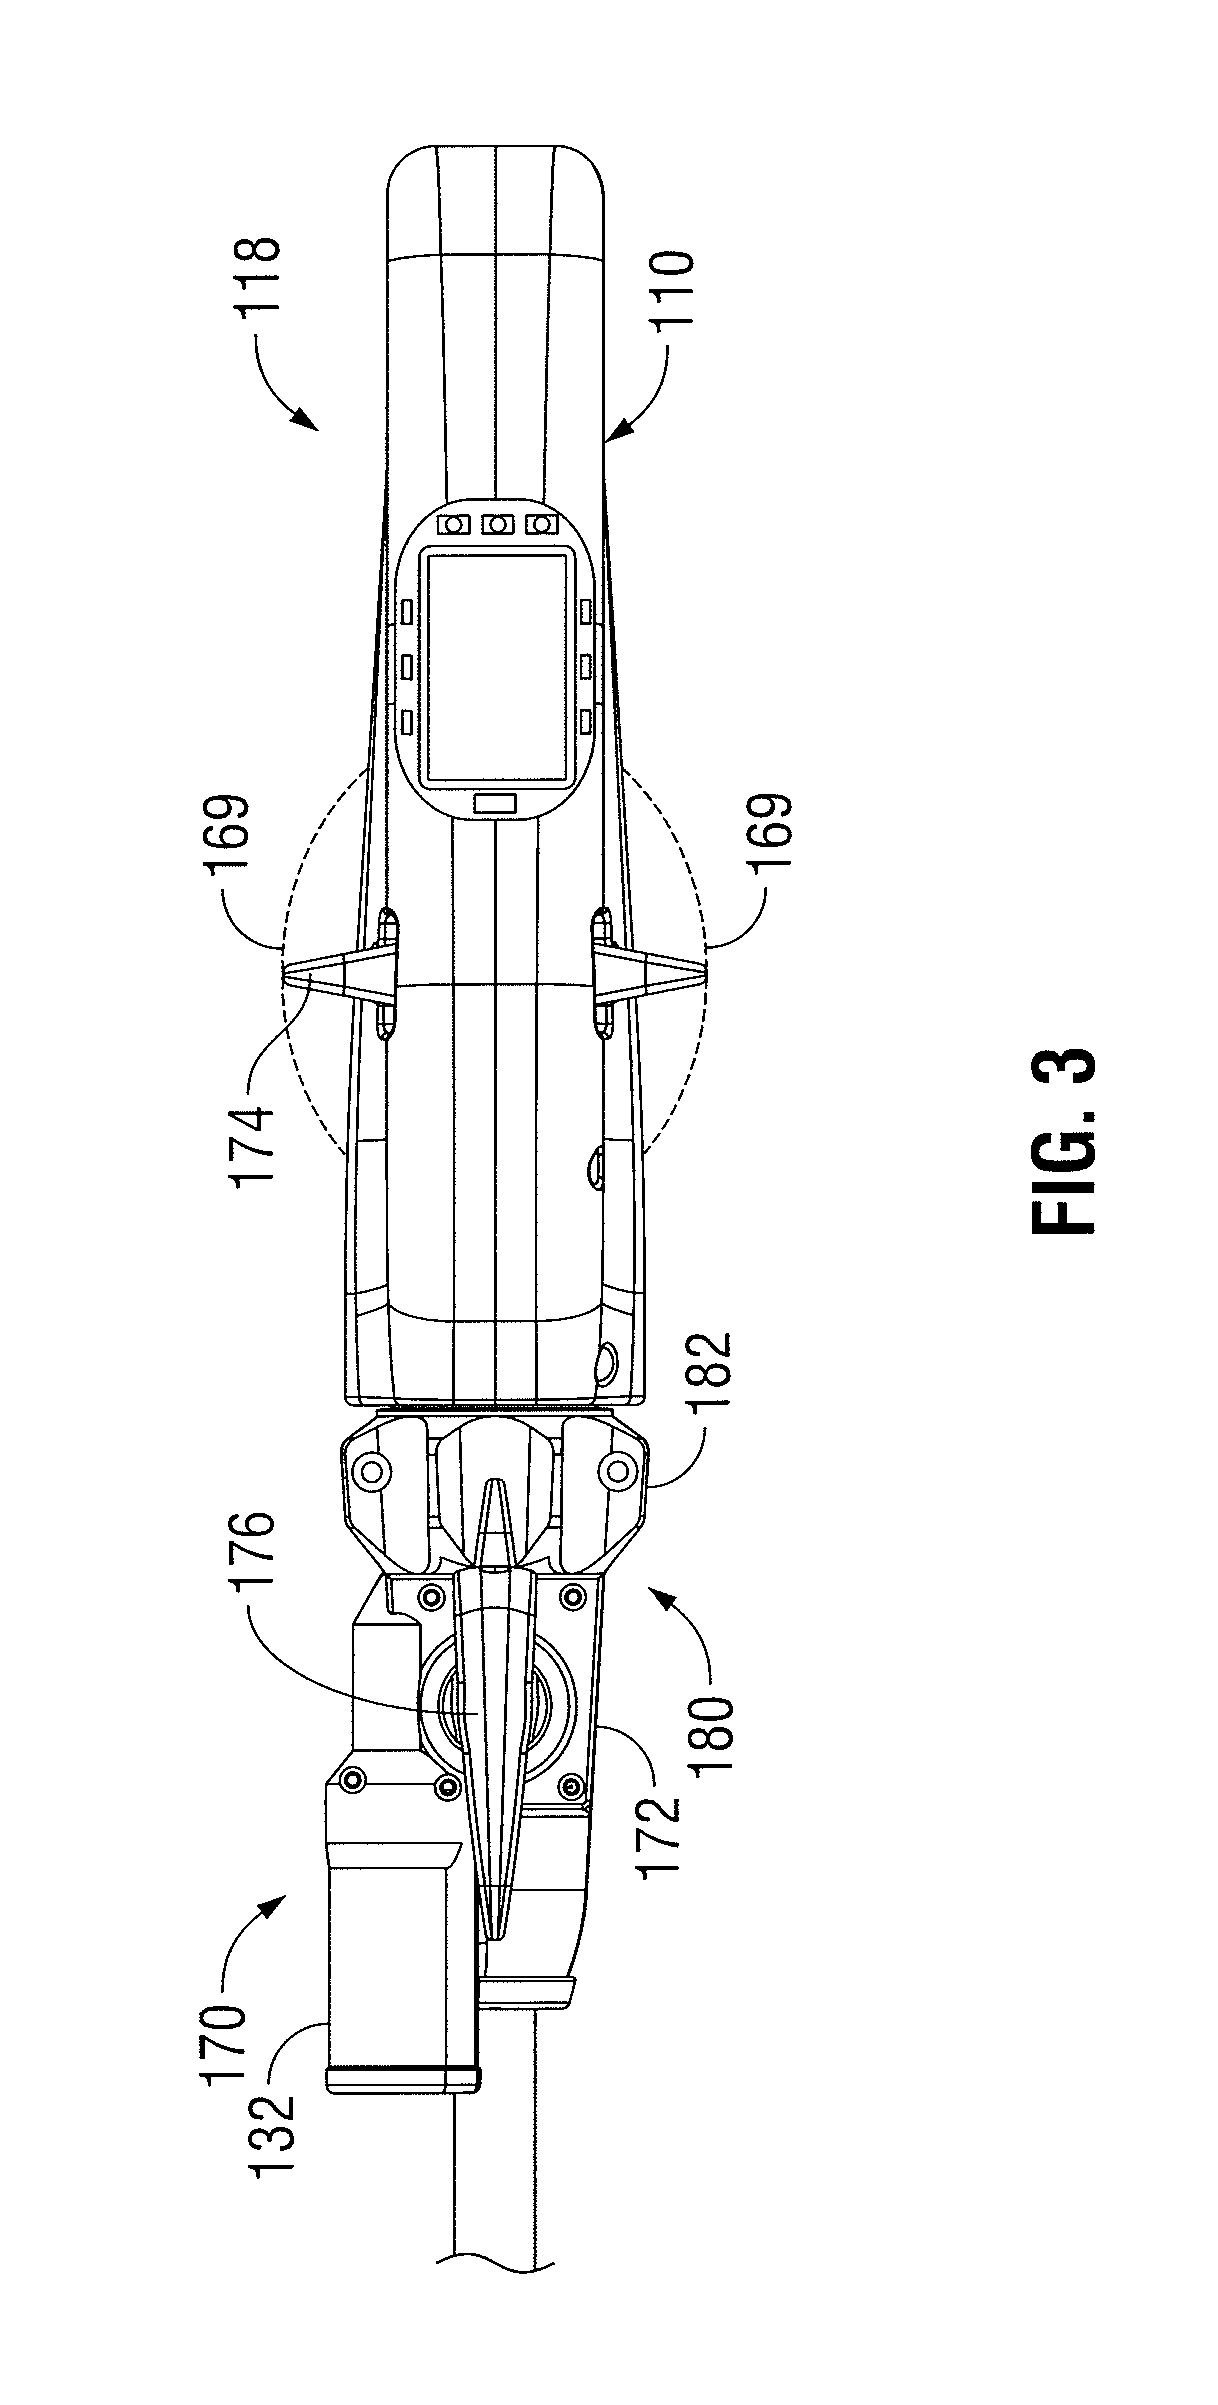 System and method for preventing reprocessing of a powered surgical instrument